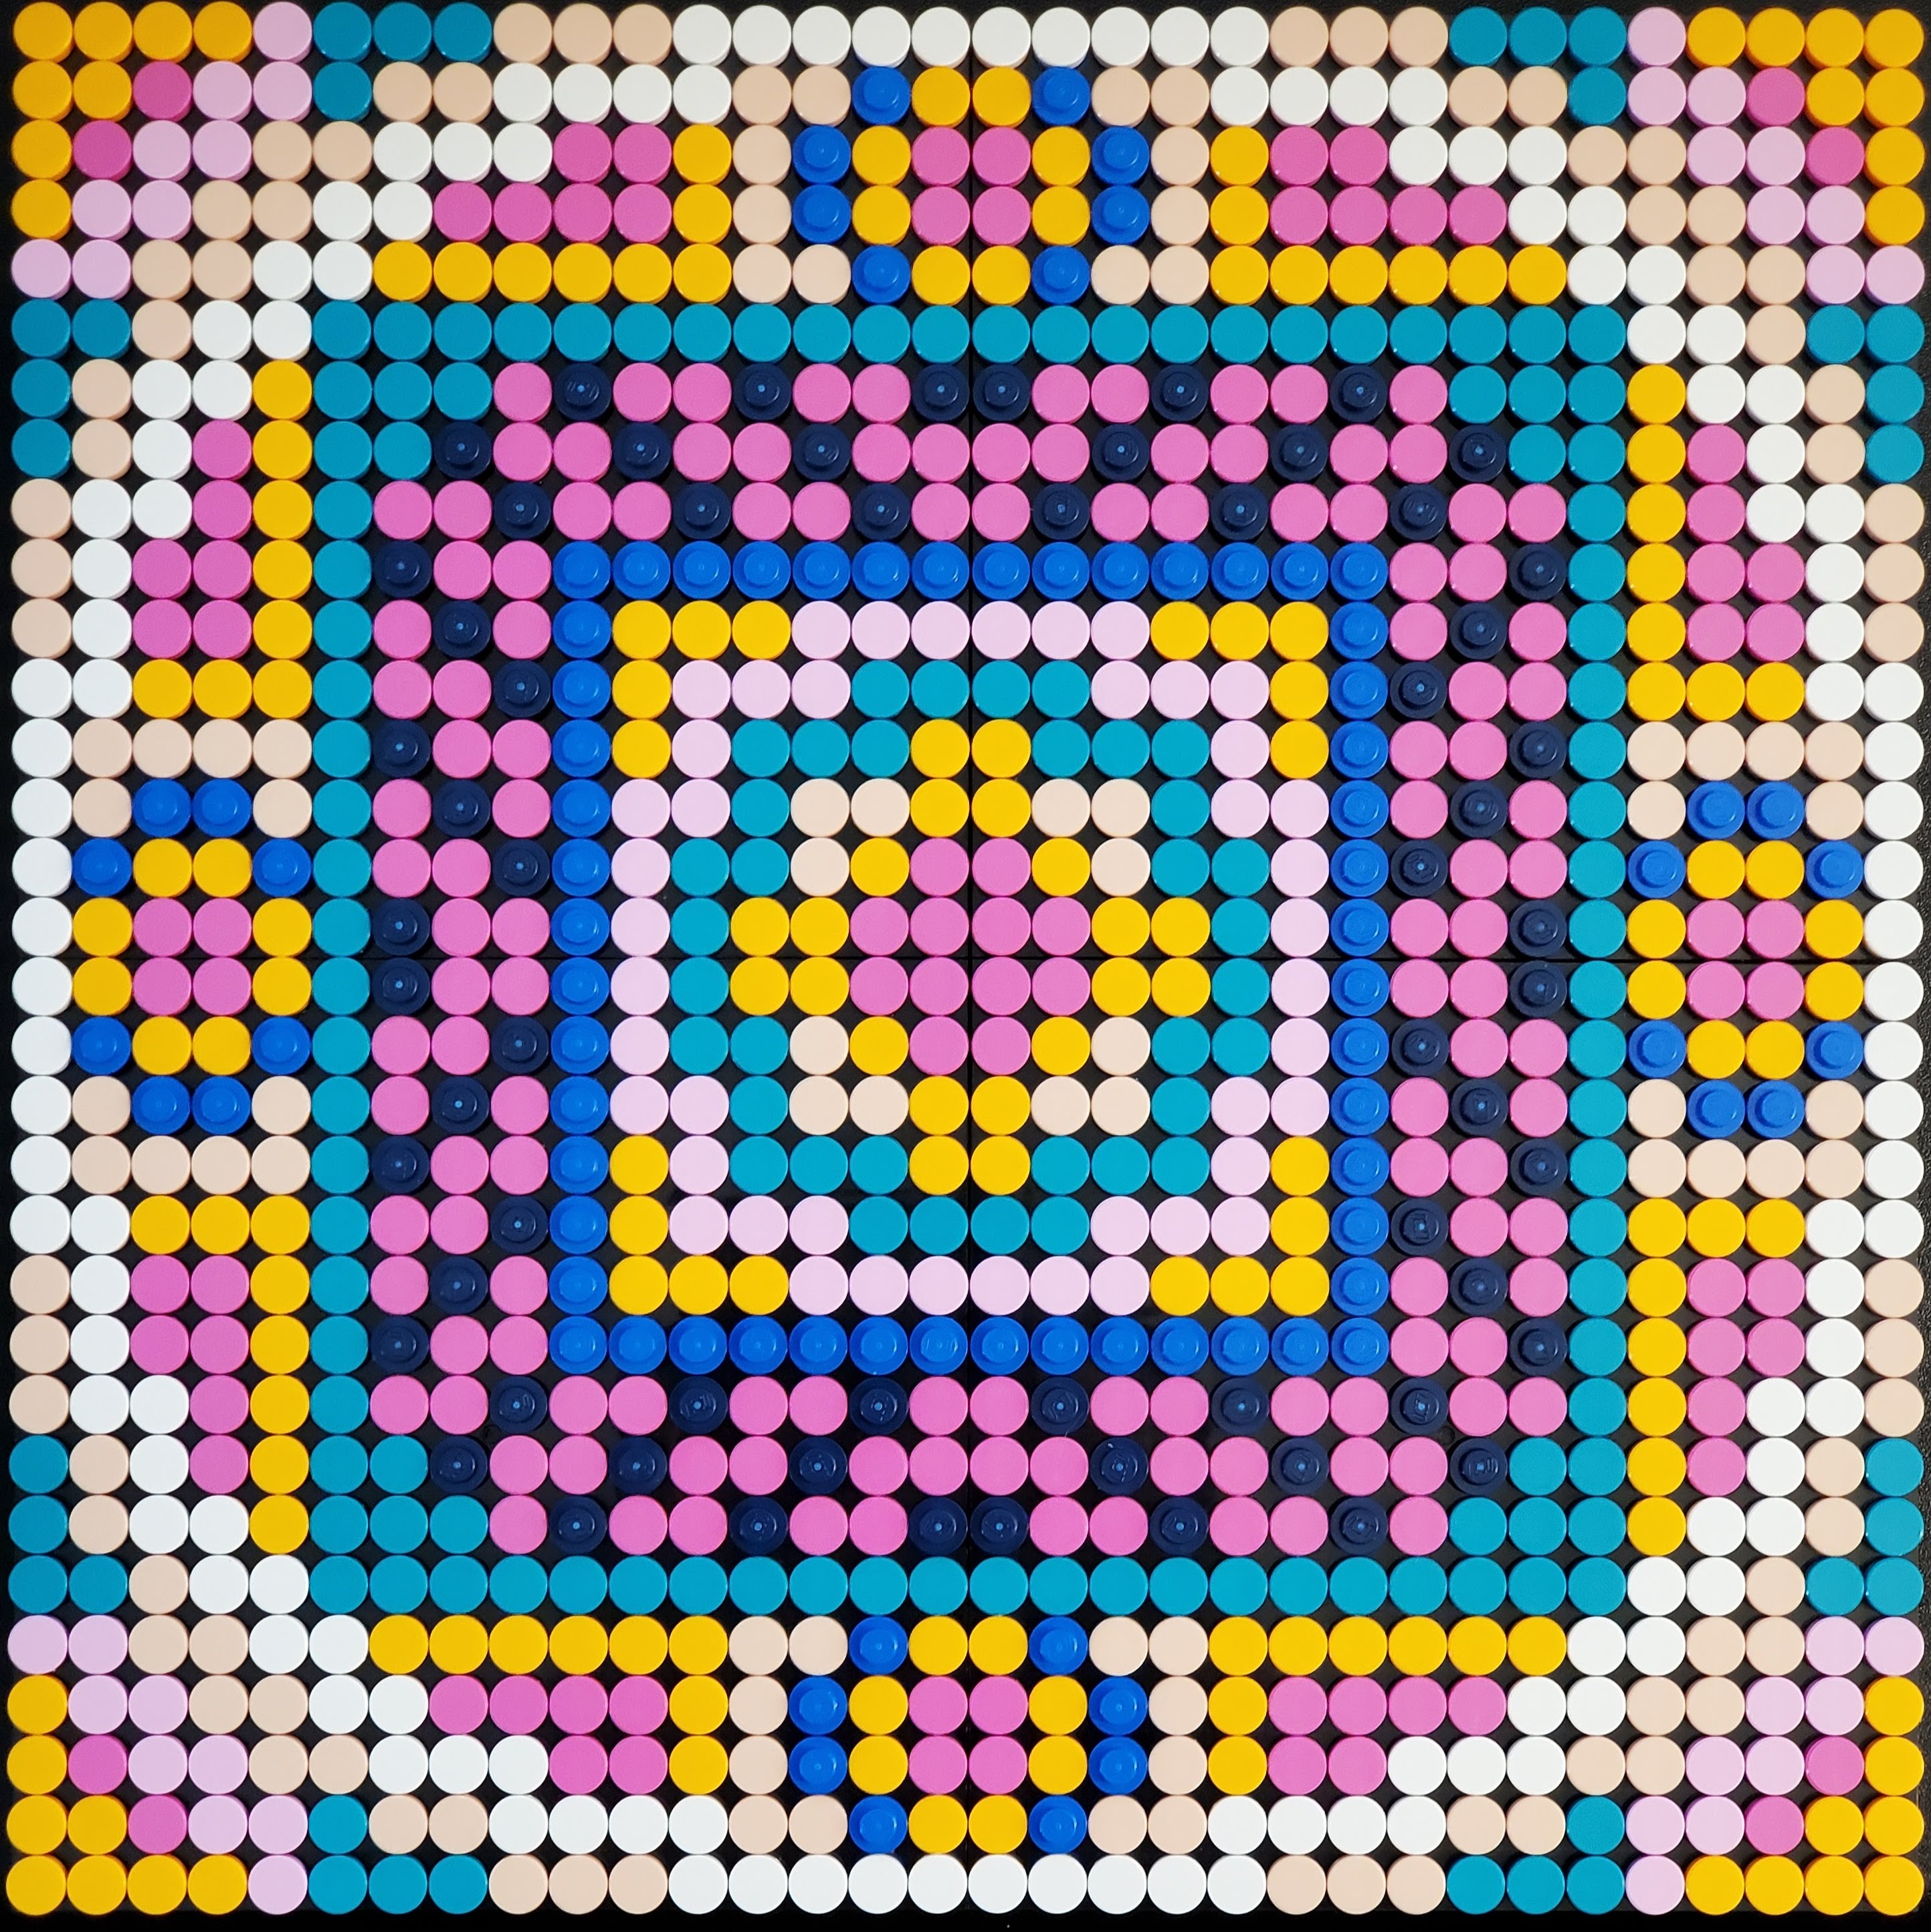 Mandala in shades of pink, blue, yellow and white.